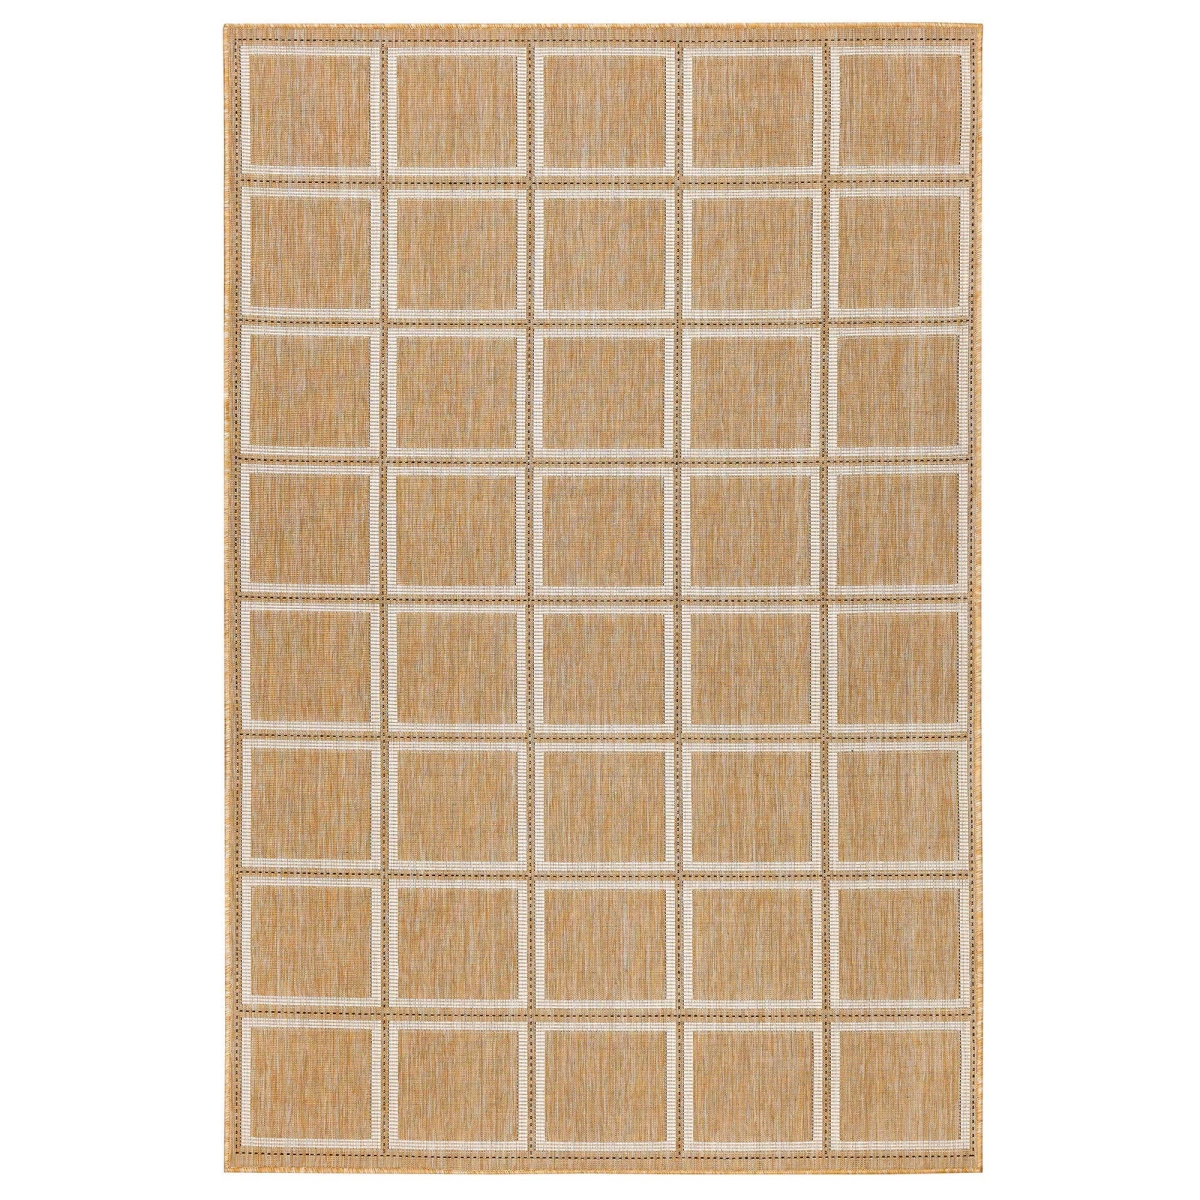 Trans-ocean Imports Cre45842612 39 In. X 59 In. Liora Manne Carmel Squares Indoor & Outdoor Wilton Woven Rug - Sand